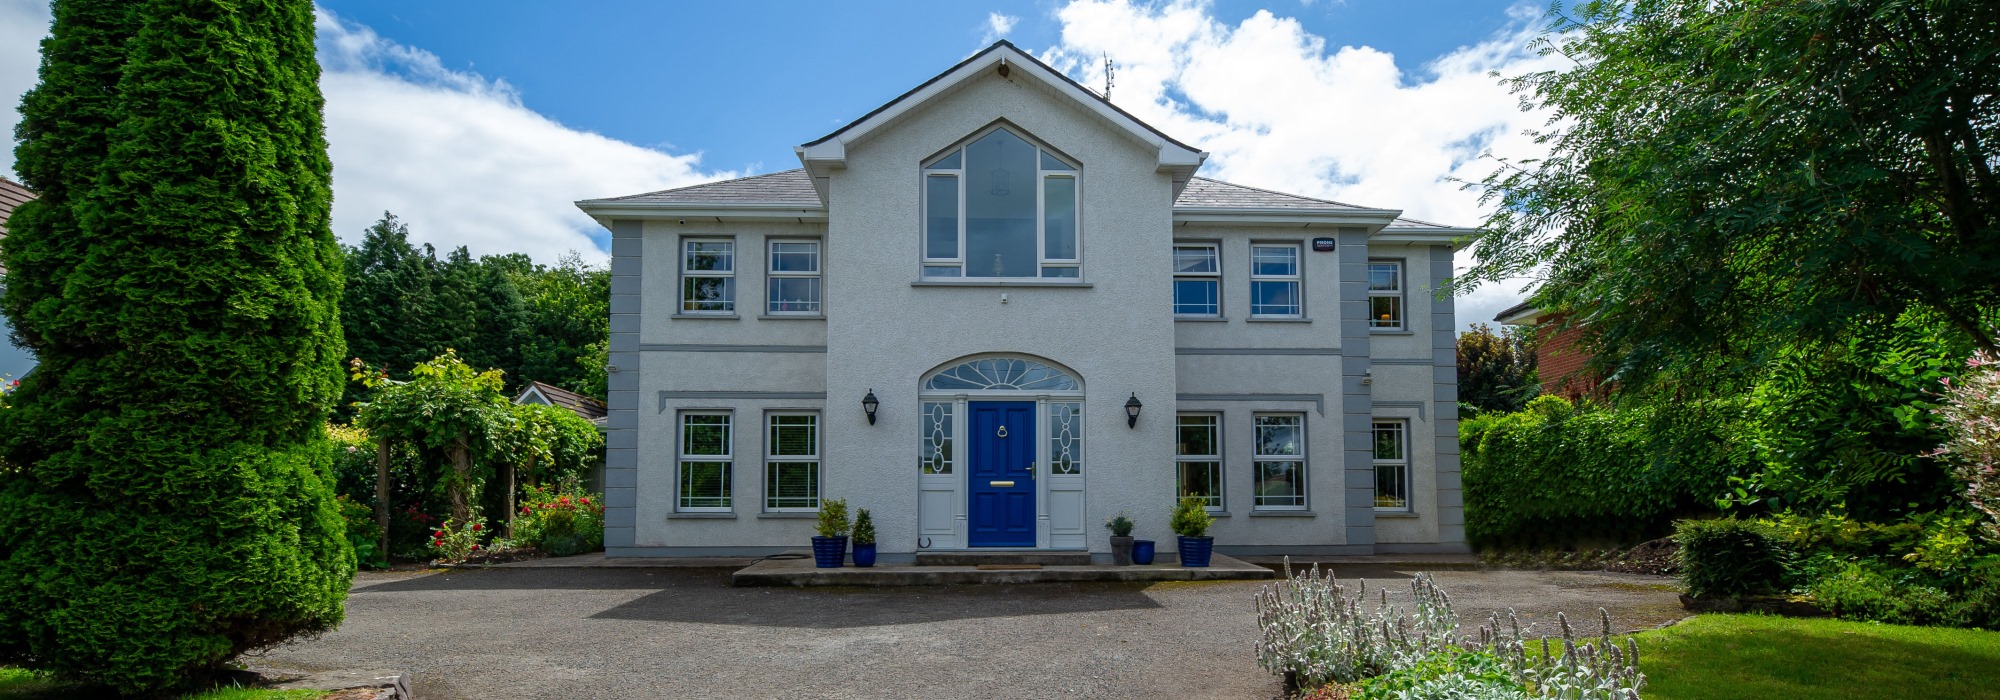 Substantial 5 Bedroom Family Home | Finistere, Duntaheen Road, Fermoy P61 AT21